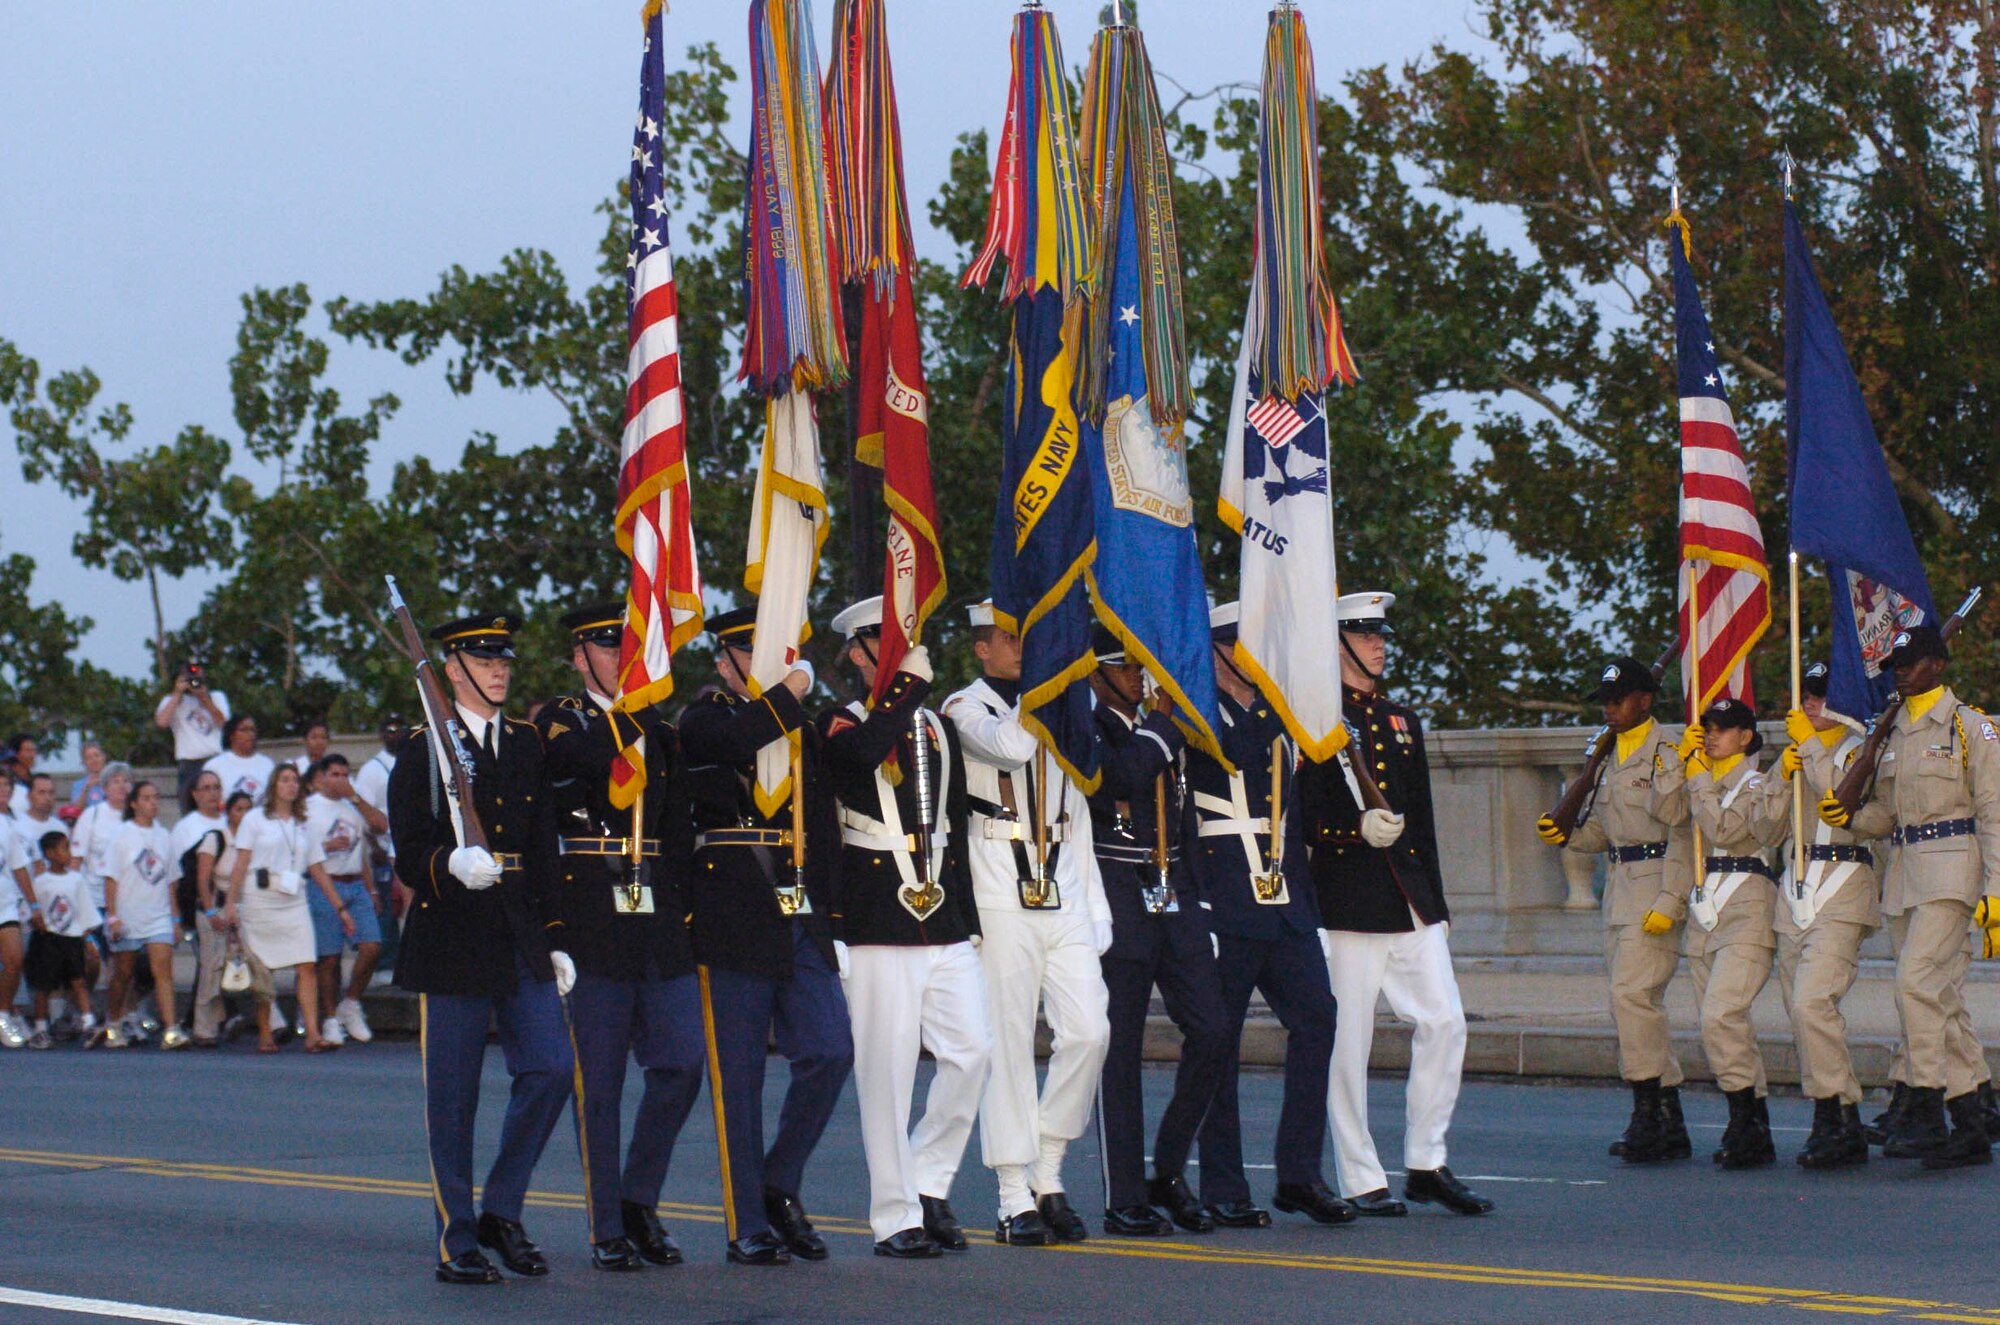 Members of the National Guard Youth Challenge Program (right) prepare to change places with the joint service honor guard on Memorial Bridge during the America Supports You Freedom Walk in Washington, D.C., Sept. 10.  (DOD photo/Army Spc. Thaddeus Harrington)